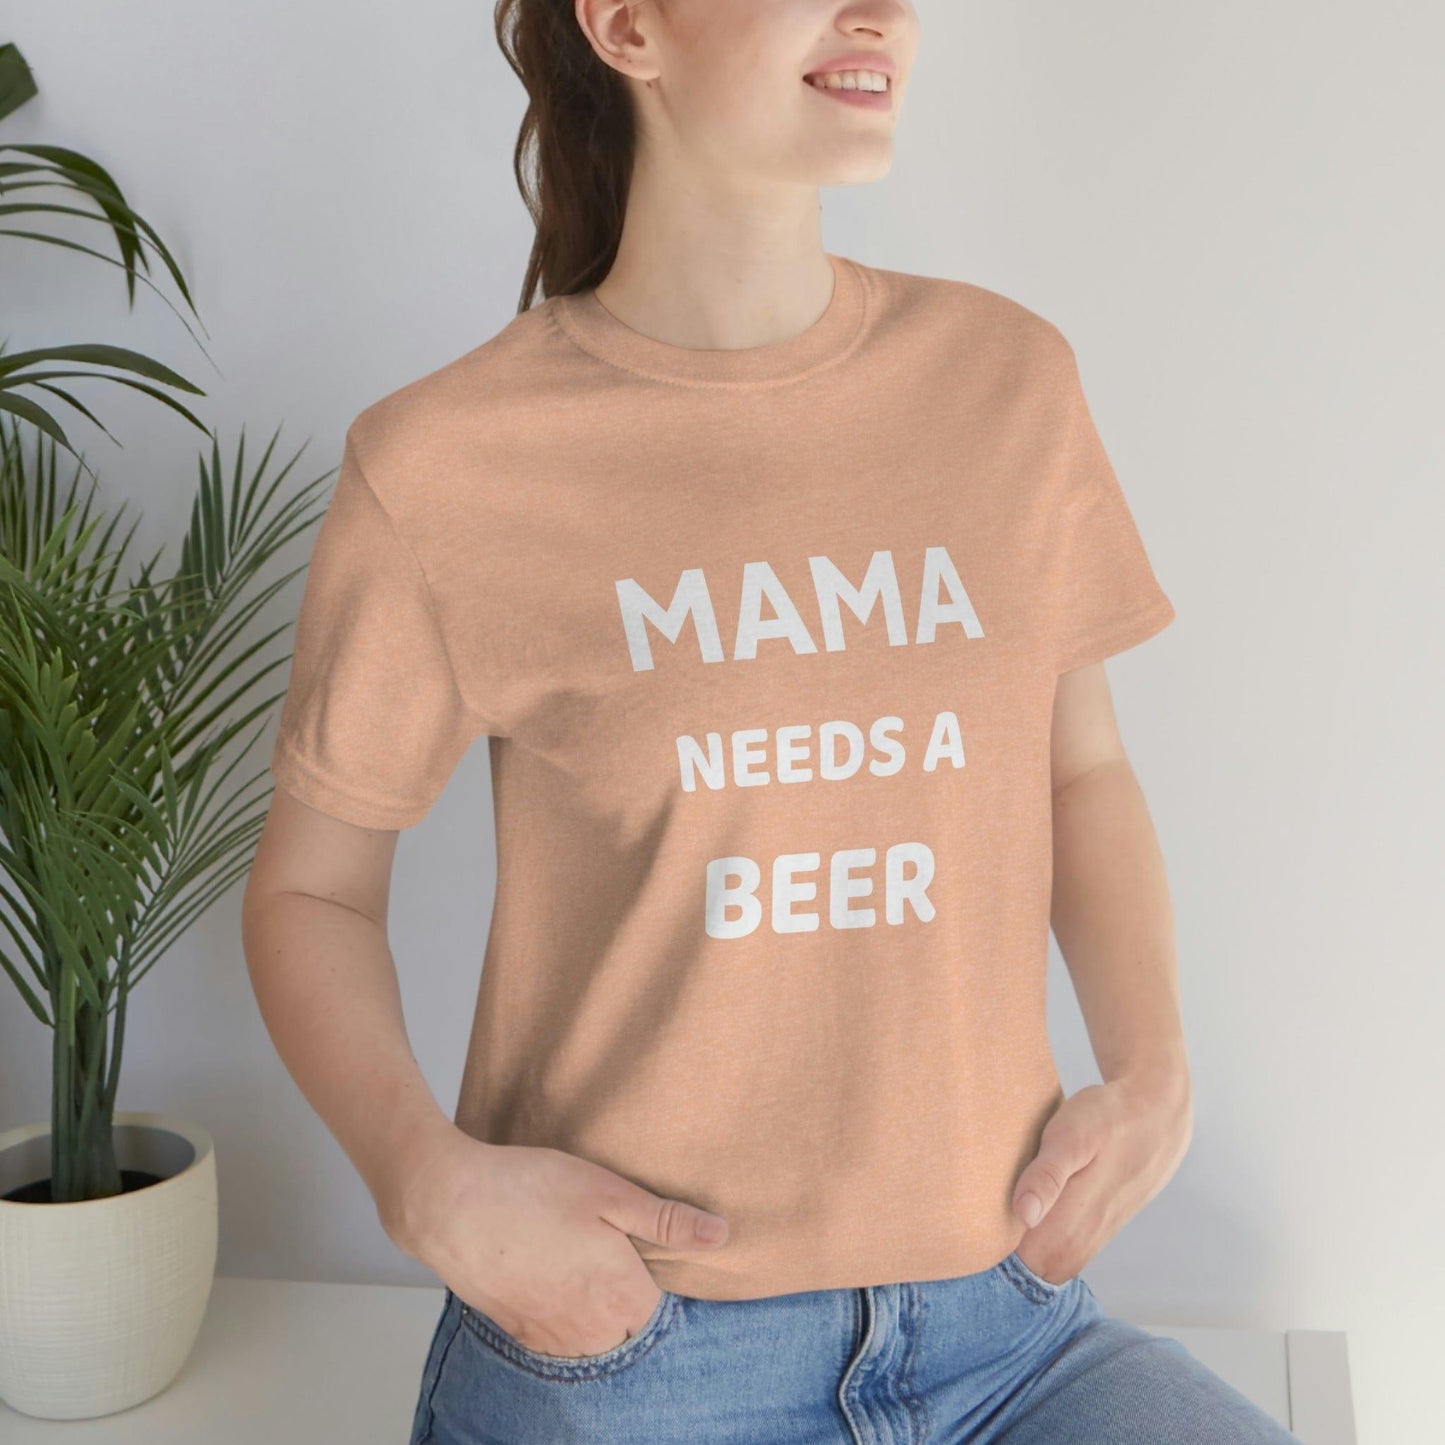 Mama needs a beer - gift for beer lover - Funny beer shirt - Funny shirt - Giftsmojo